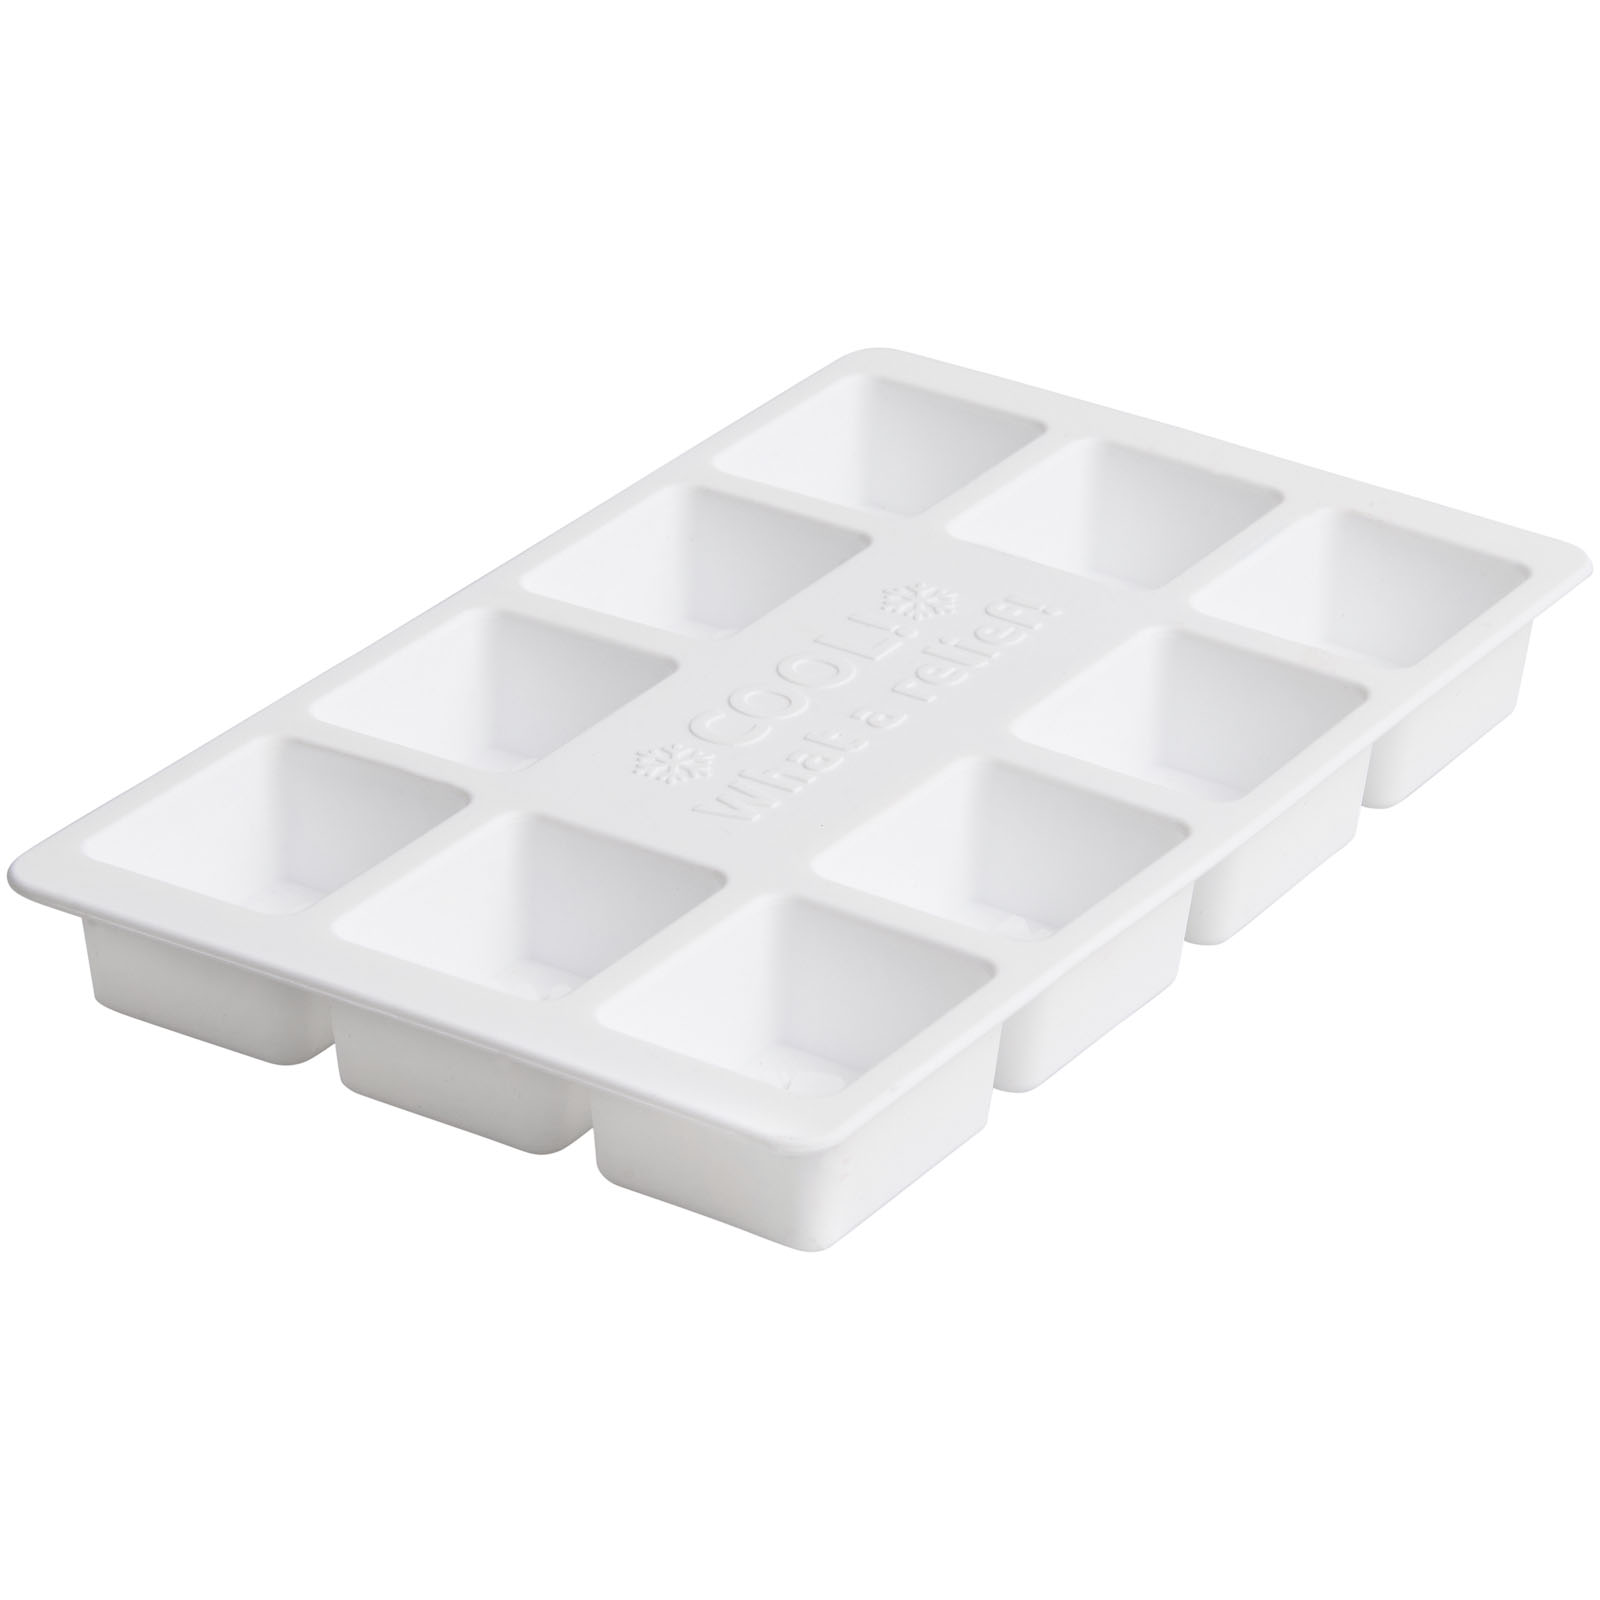 Home & Kitchen - Chill customisable ice cube tray